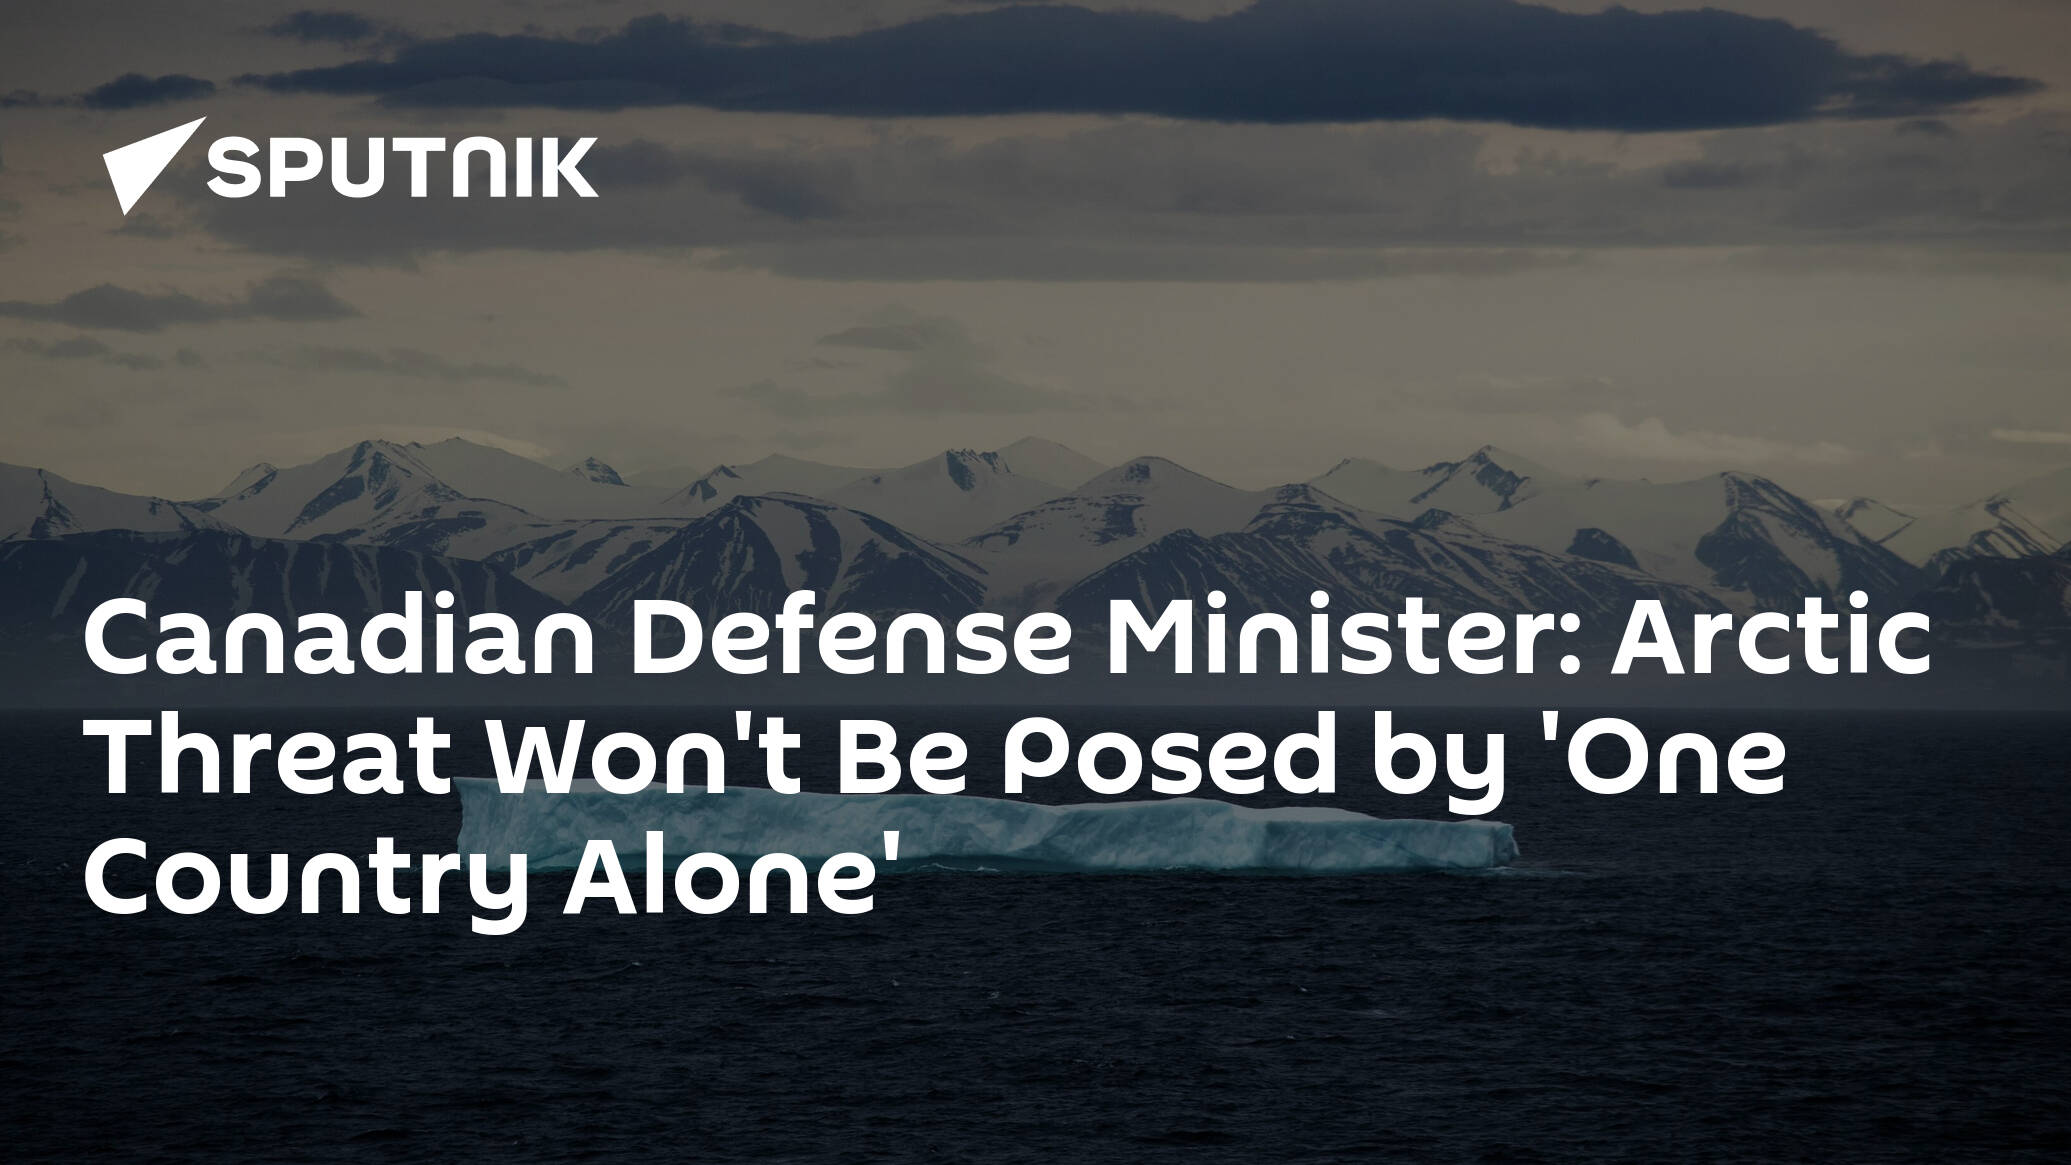 Canadian Defense Minister: Arctic Threat Won't Be Posed by 'One Country Alone'